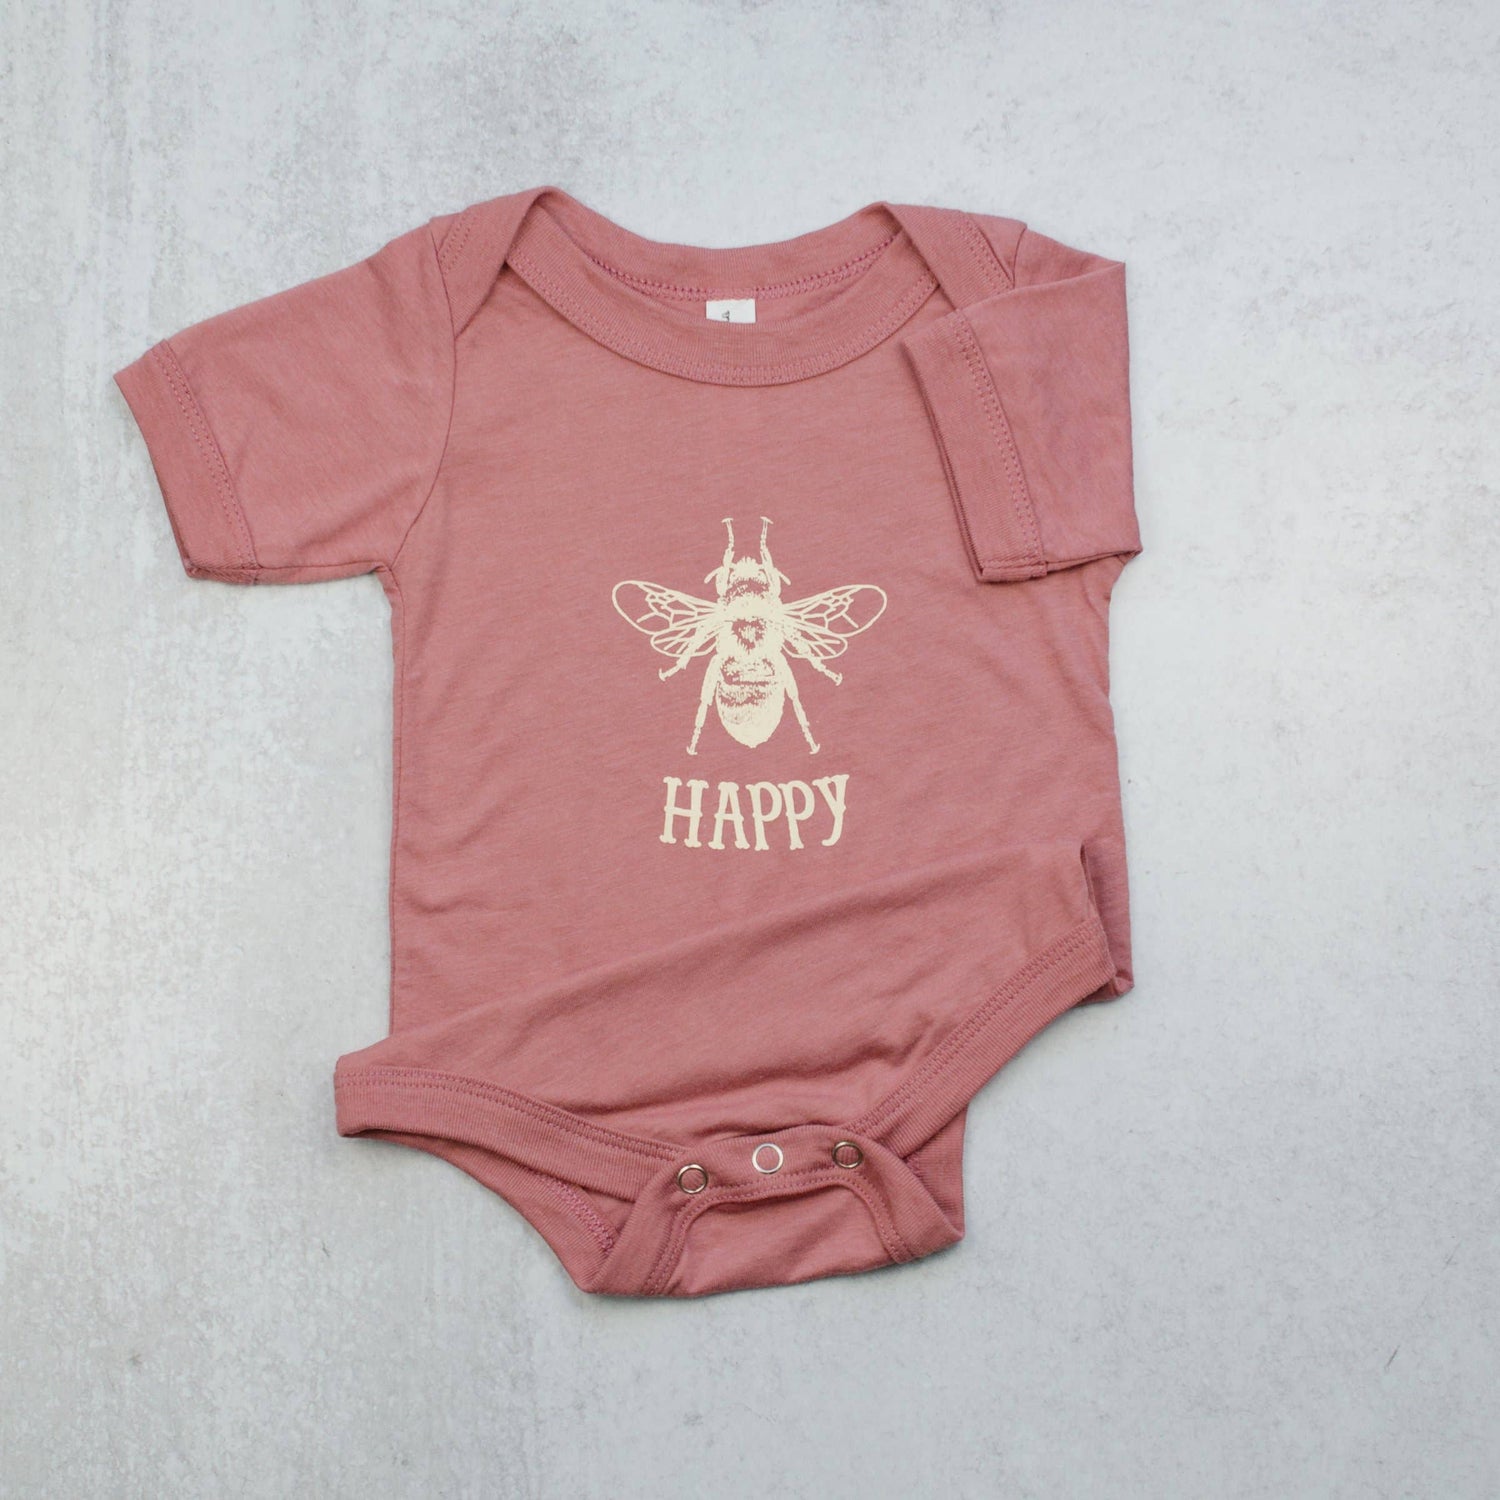 Salmon Pink or Mauve baby onesie Bee Happy by Bee Happy Today